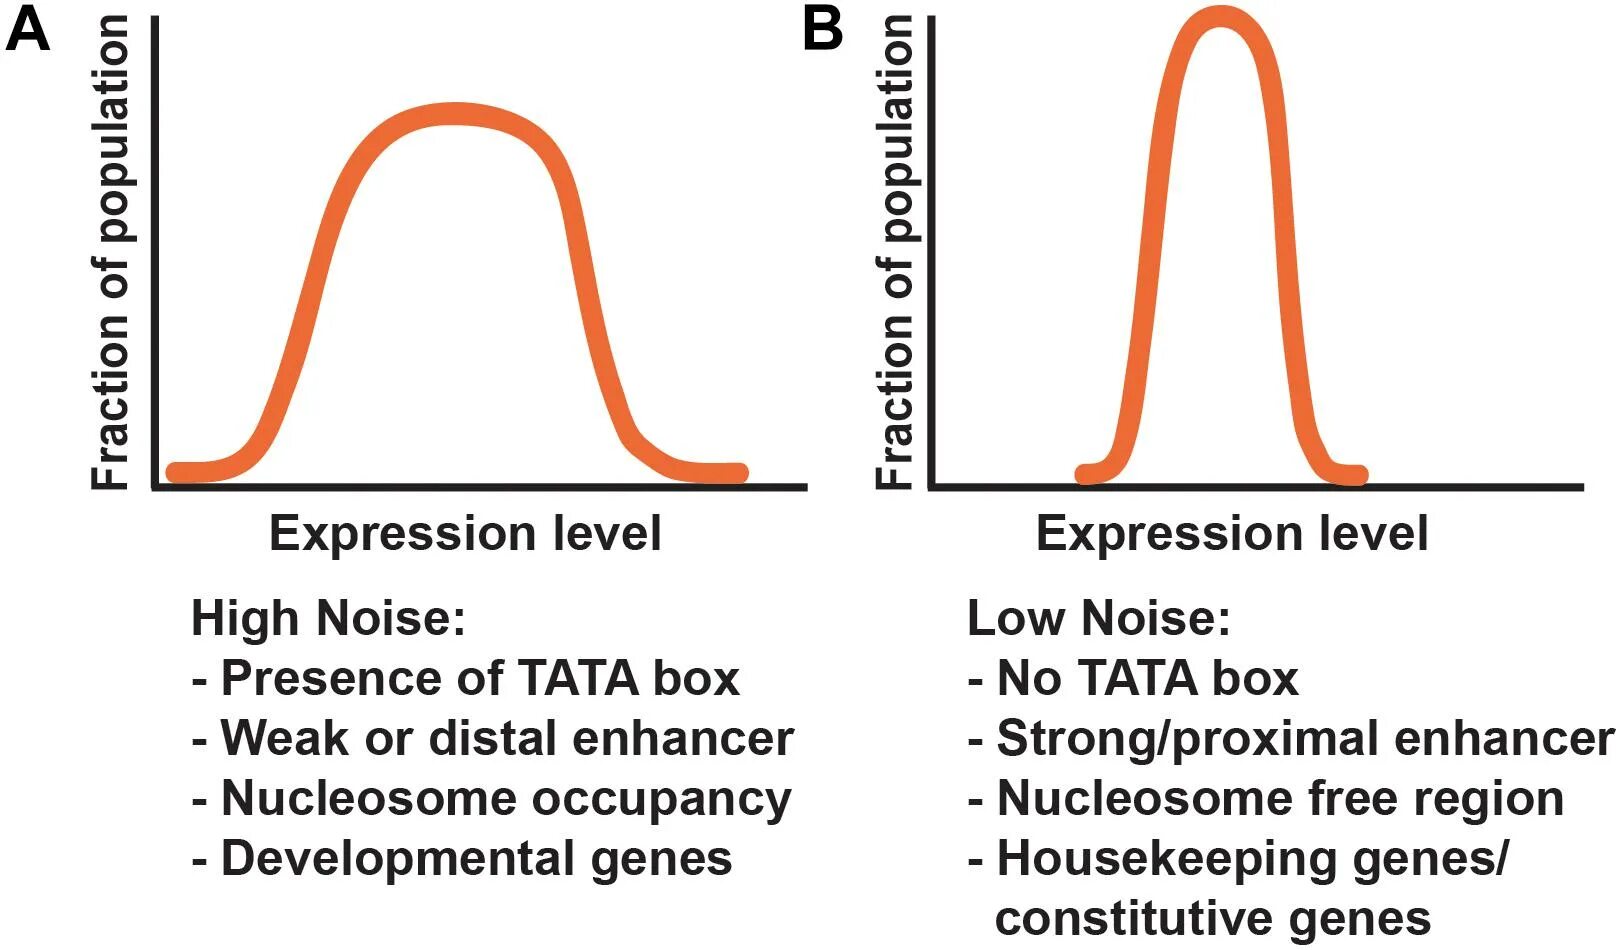 Double occupancy формула. Induction in Noisy domains. Expression levels